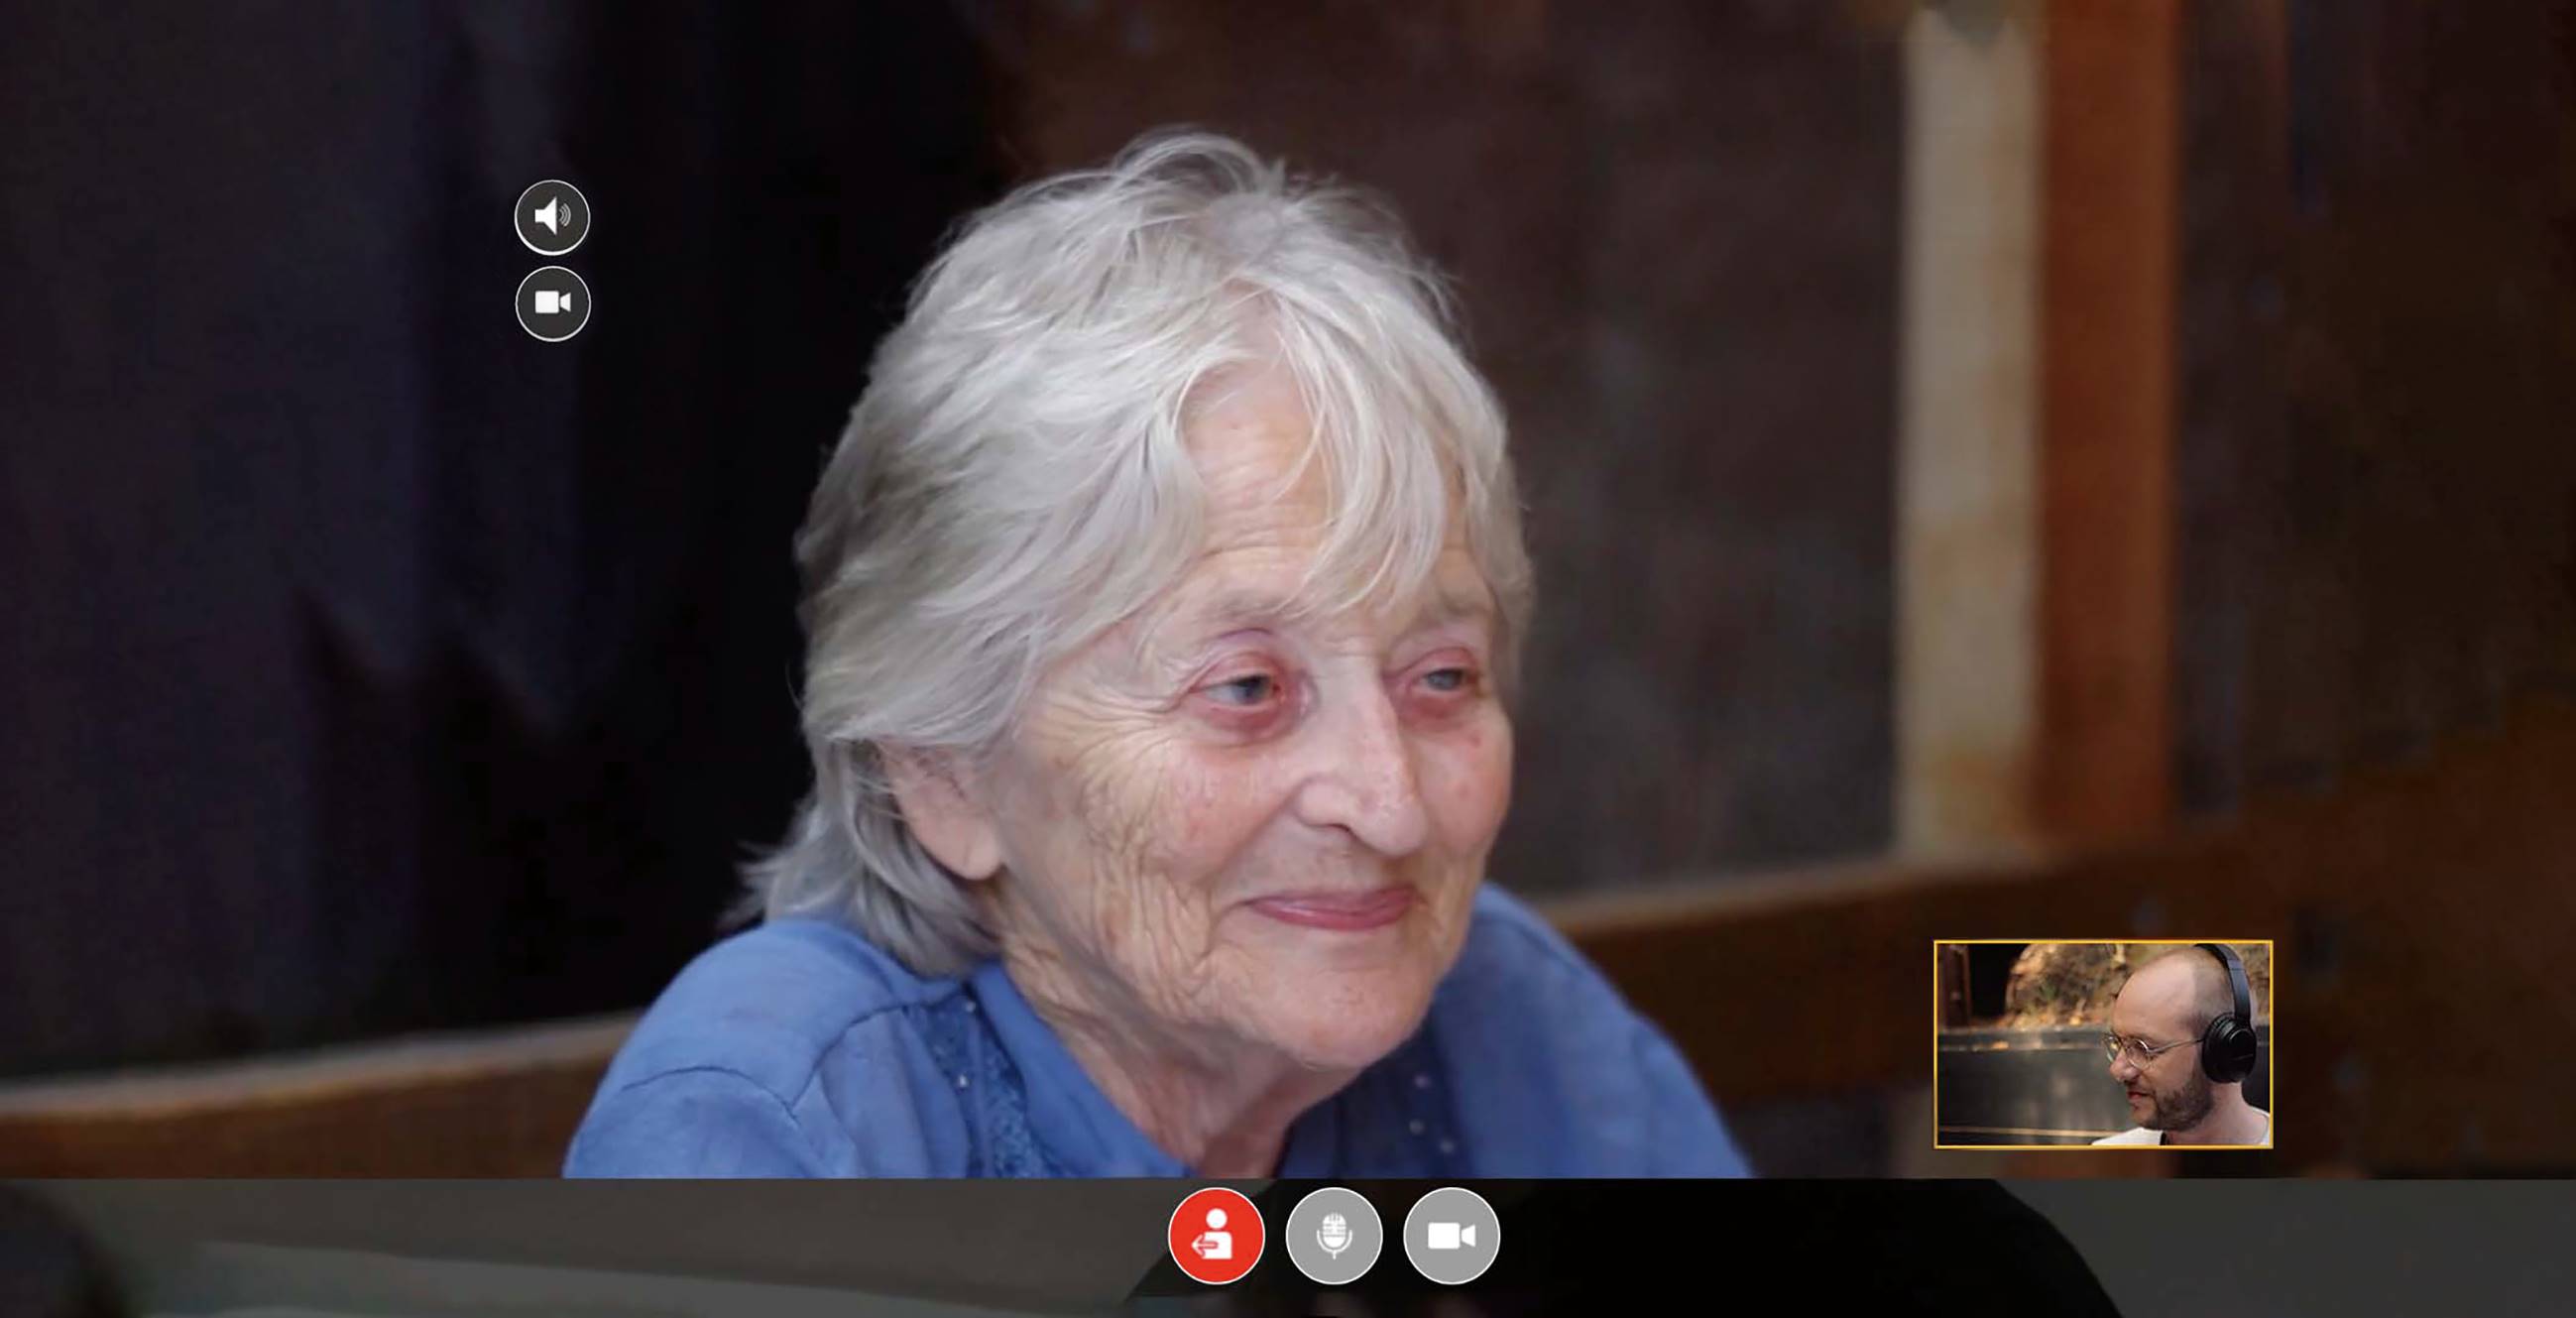 Smiling older woman pictured on a video chat with a young man wearing headphones.